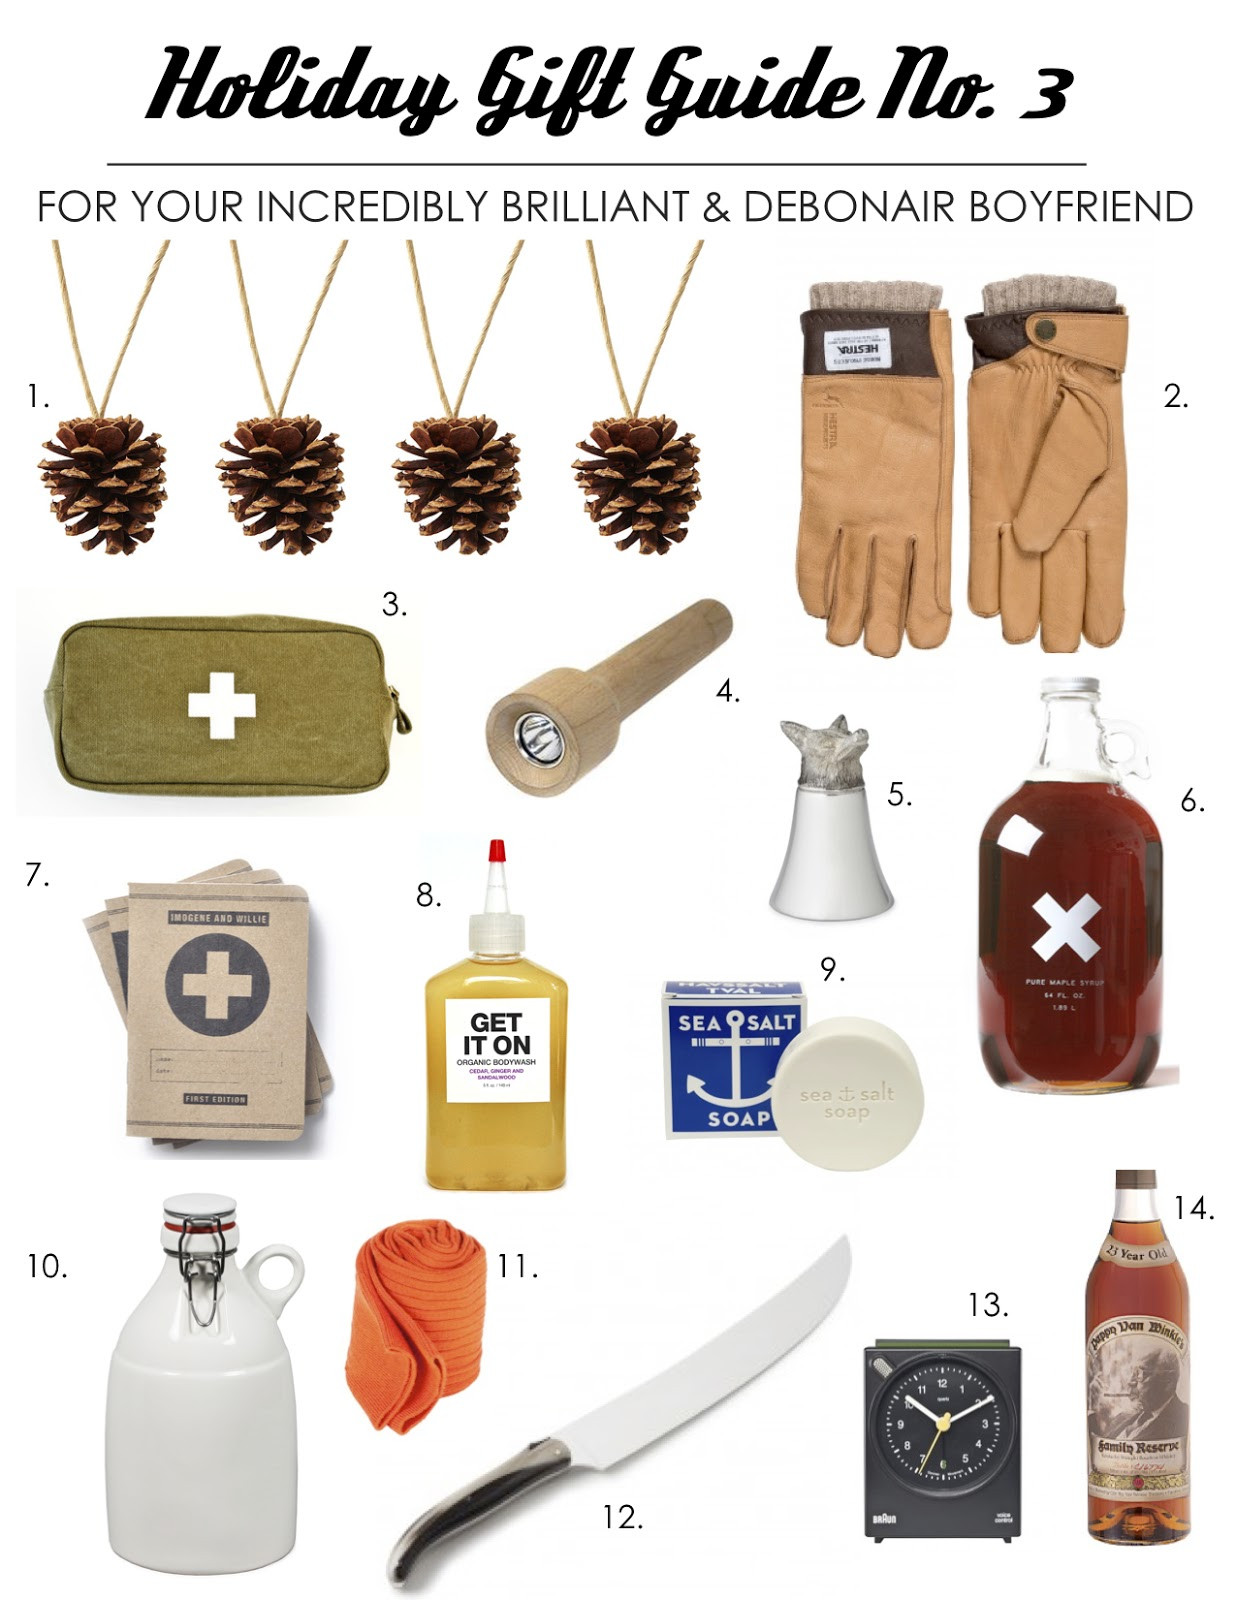 Gift Ideas For A Boyfriend
 Gift Guide 2012 The Best Gifts for Your Boyfriend Hey